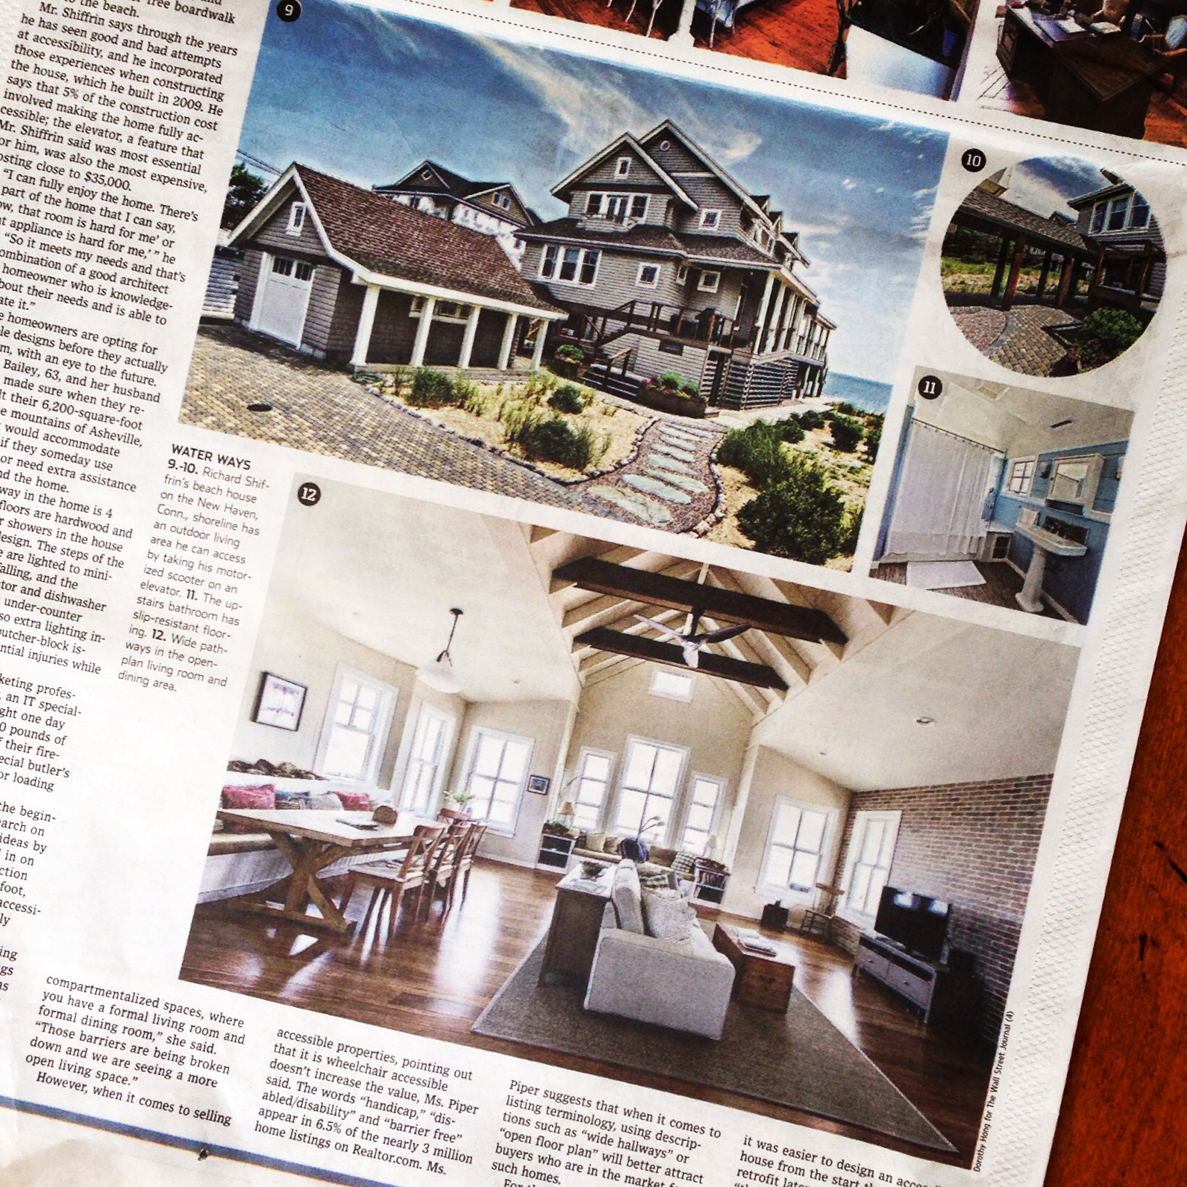 Wall Street Journal 2014- Featured Architect